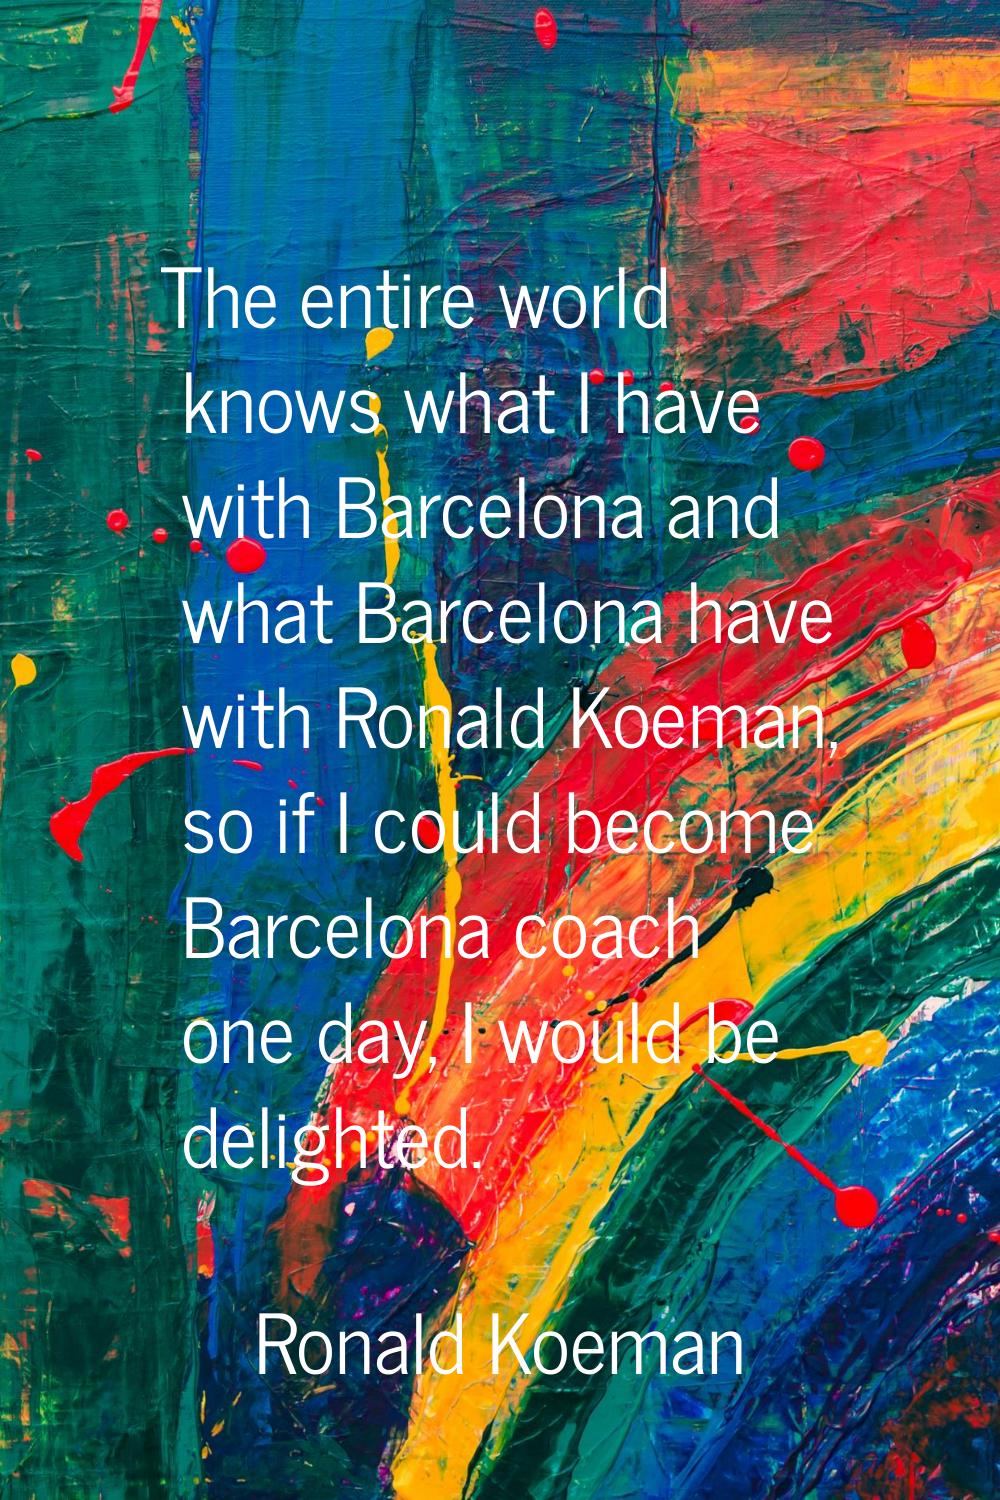 The entire world knows what I have with Barcelona and what Barcelona have with Ronald Koeman, so if